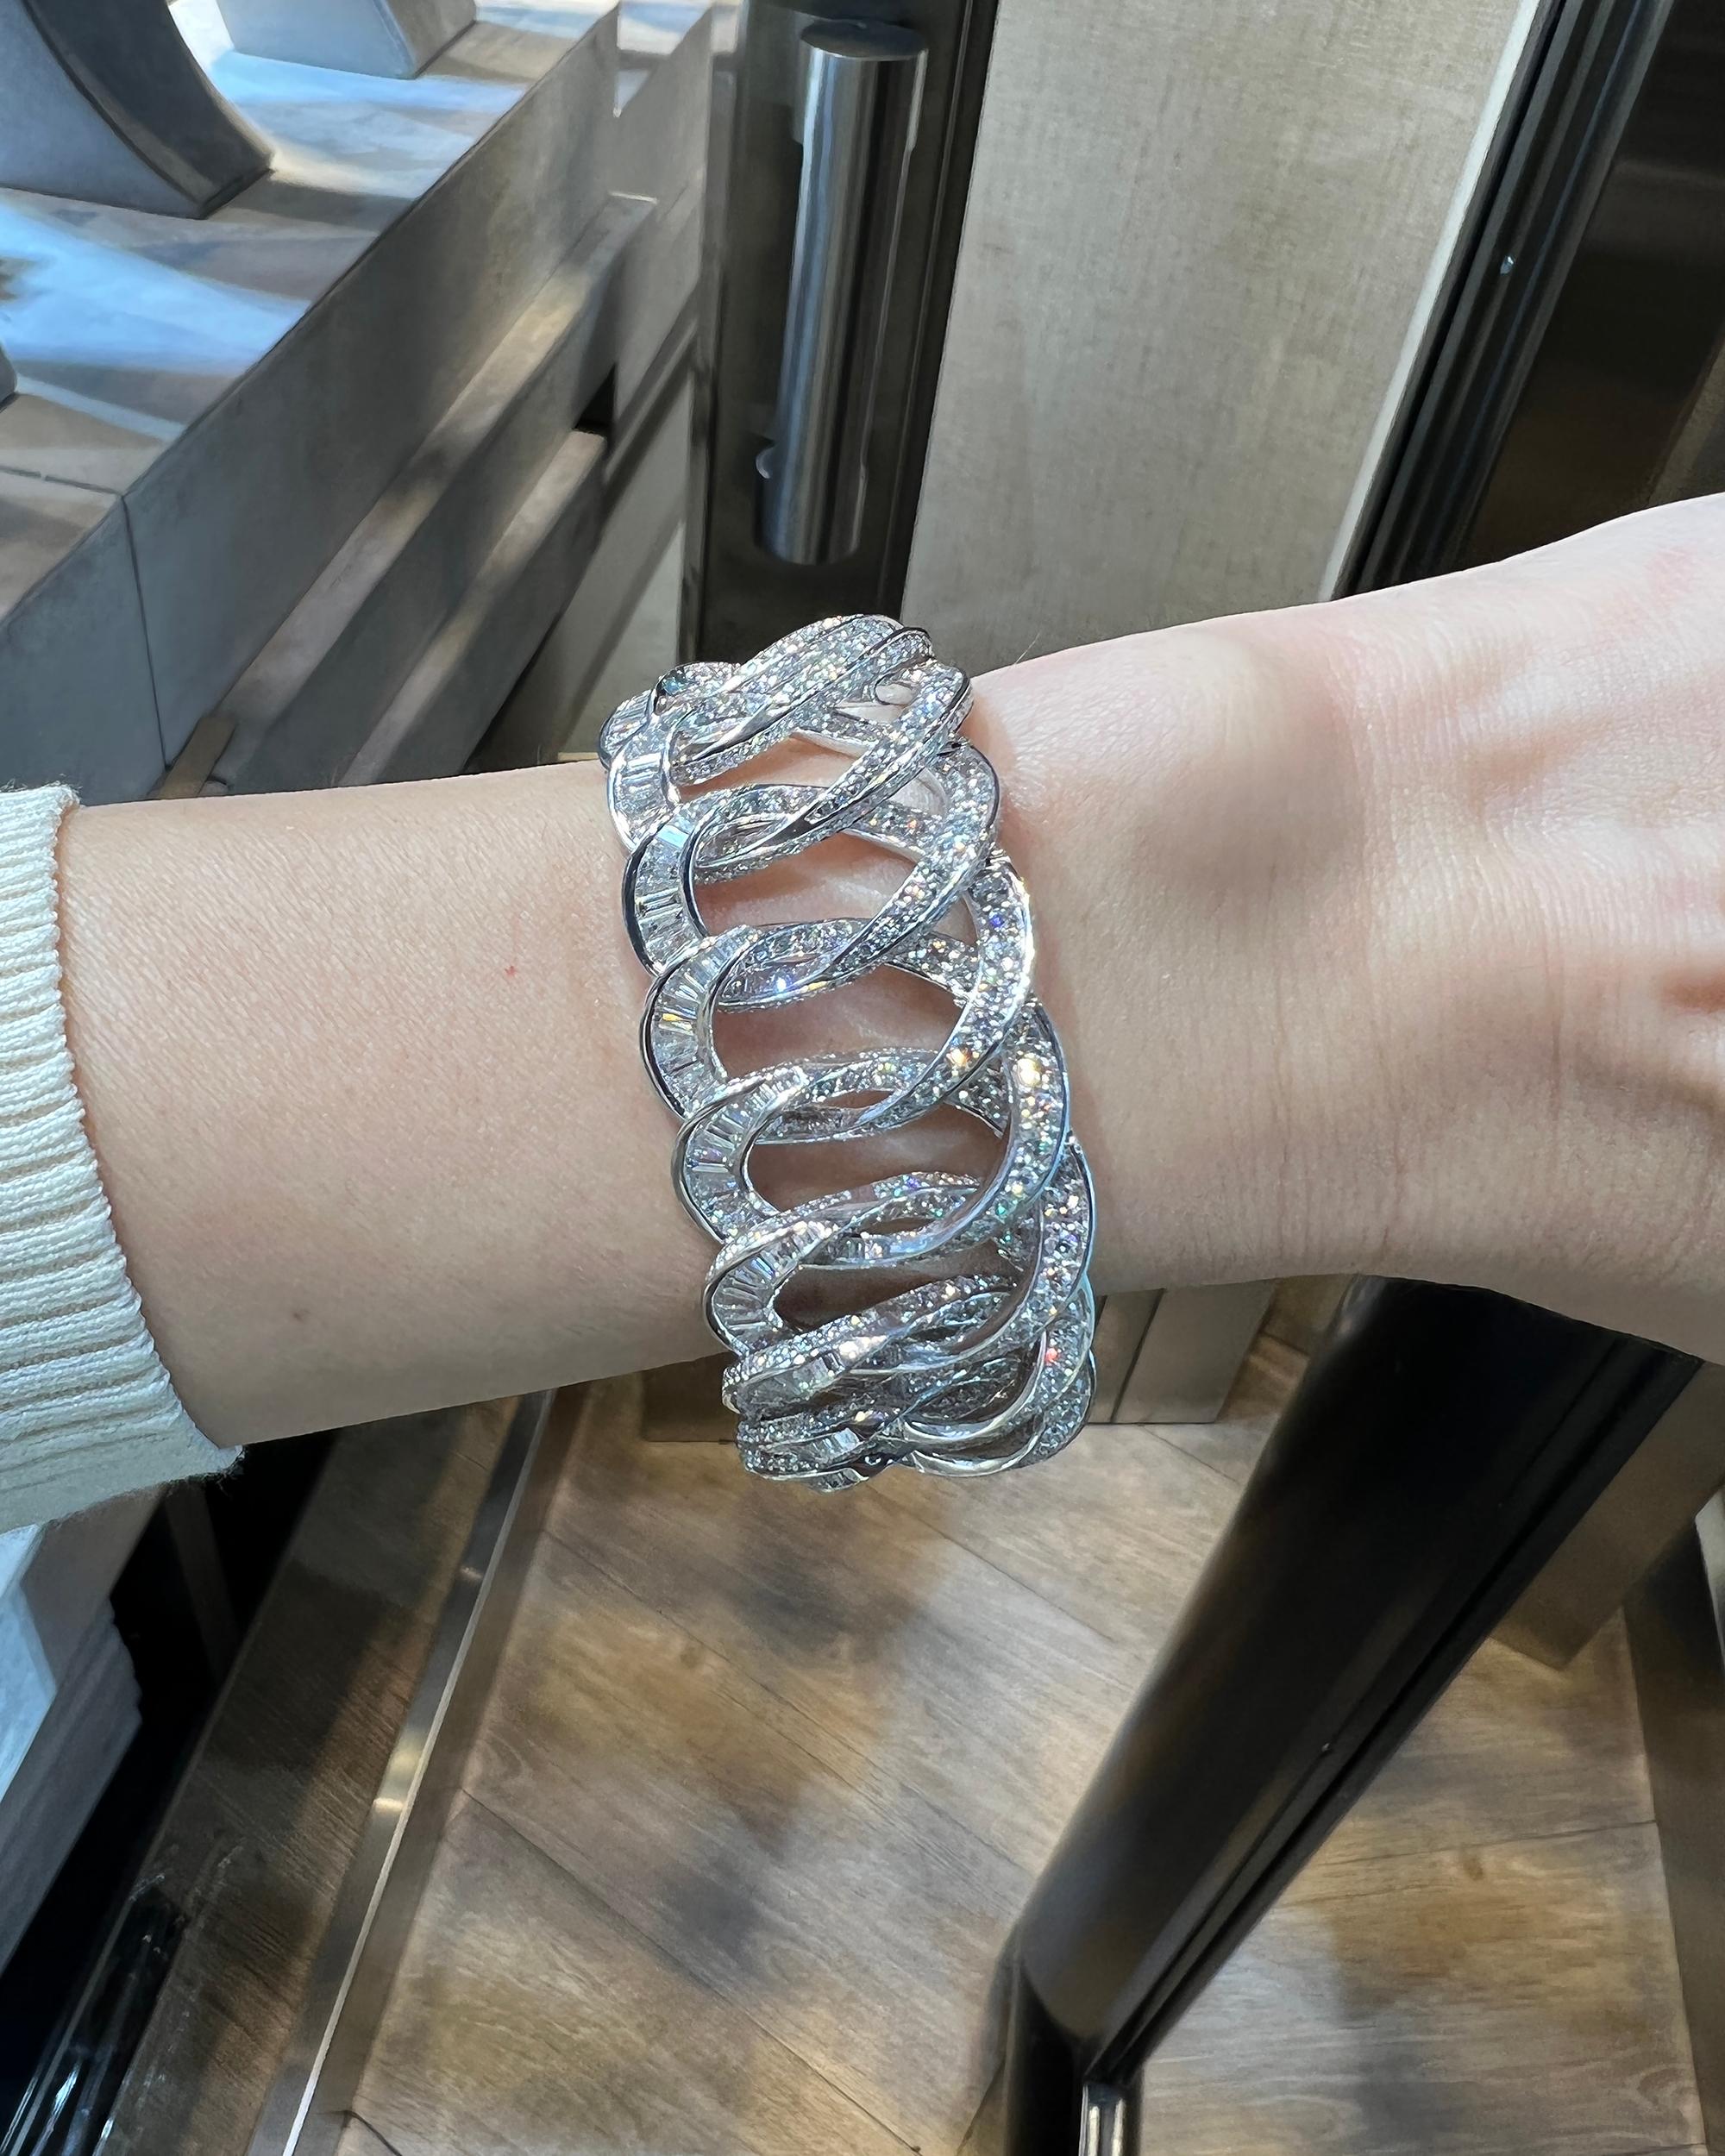 A link bracelet made with diamonds and 18k white gold by Spectra Fine Jewelry.
200 baguette diamonds weighing 4.36 carats.
1484 round diamonds weighing 15.77 carats.
201 tapered baguette diamonds weighing 4.92carats.
Total diamond weight is 25.05